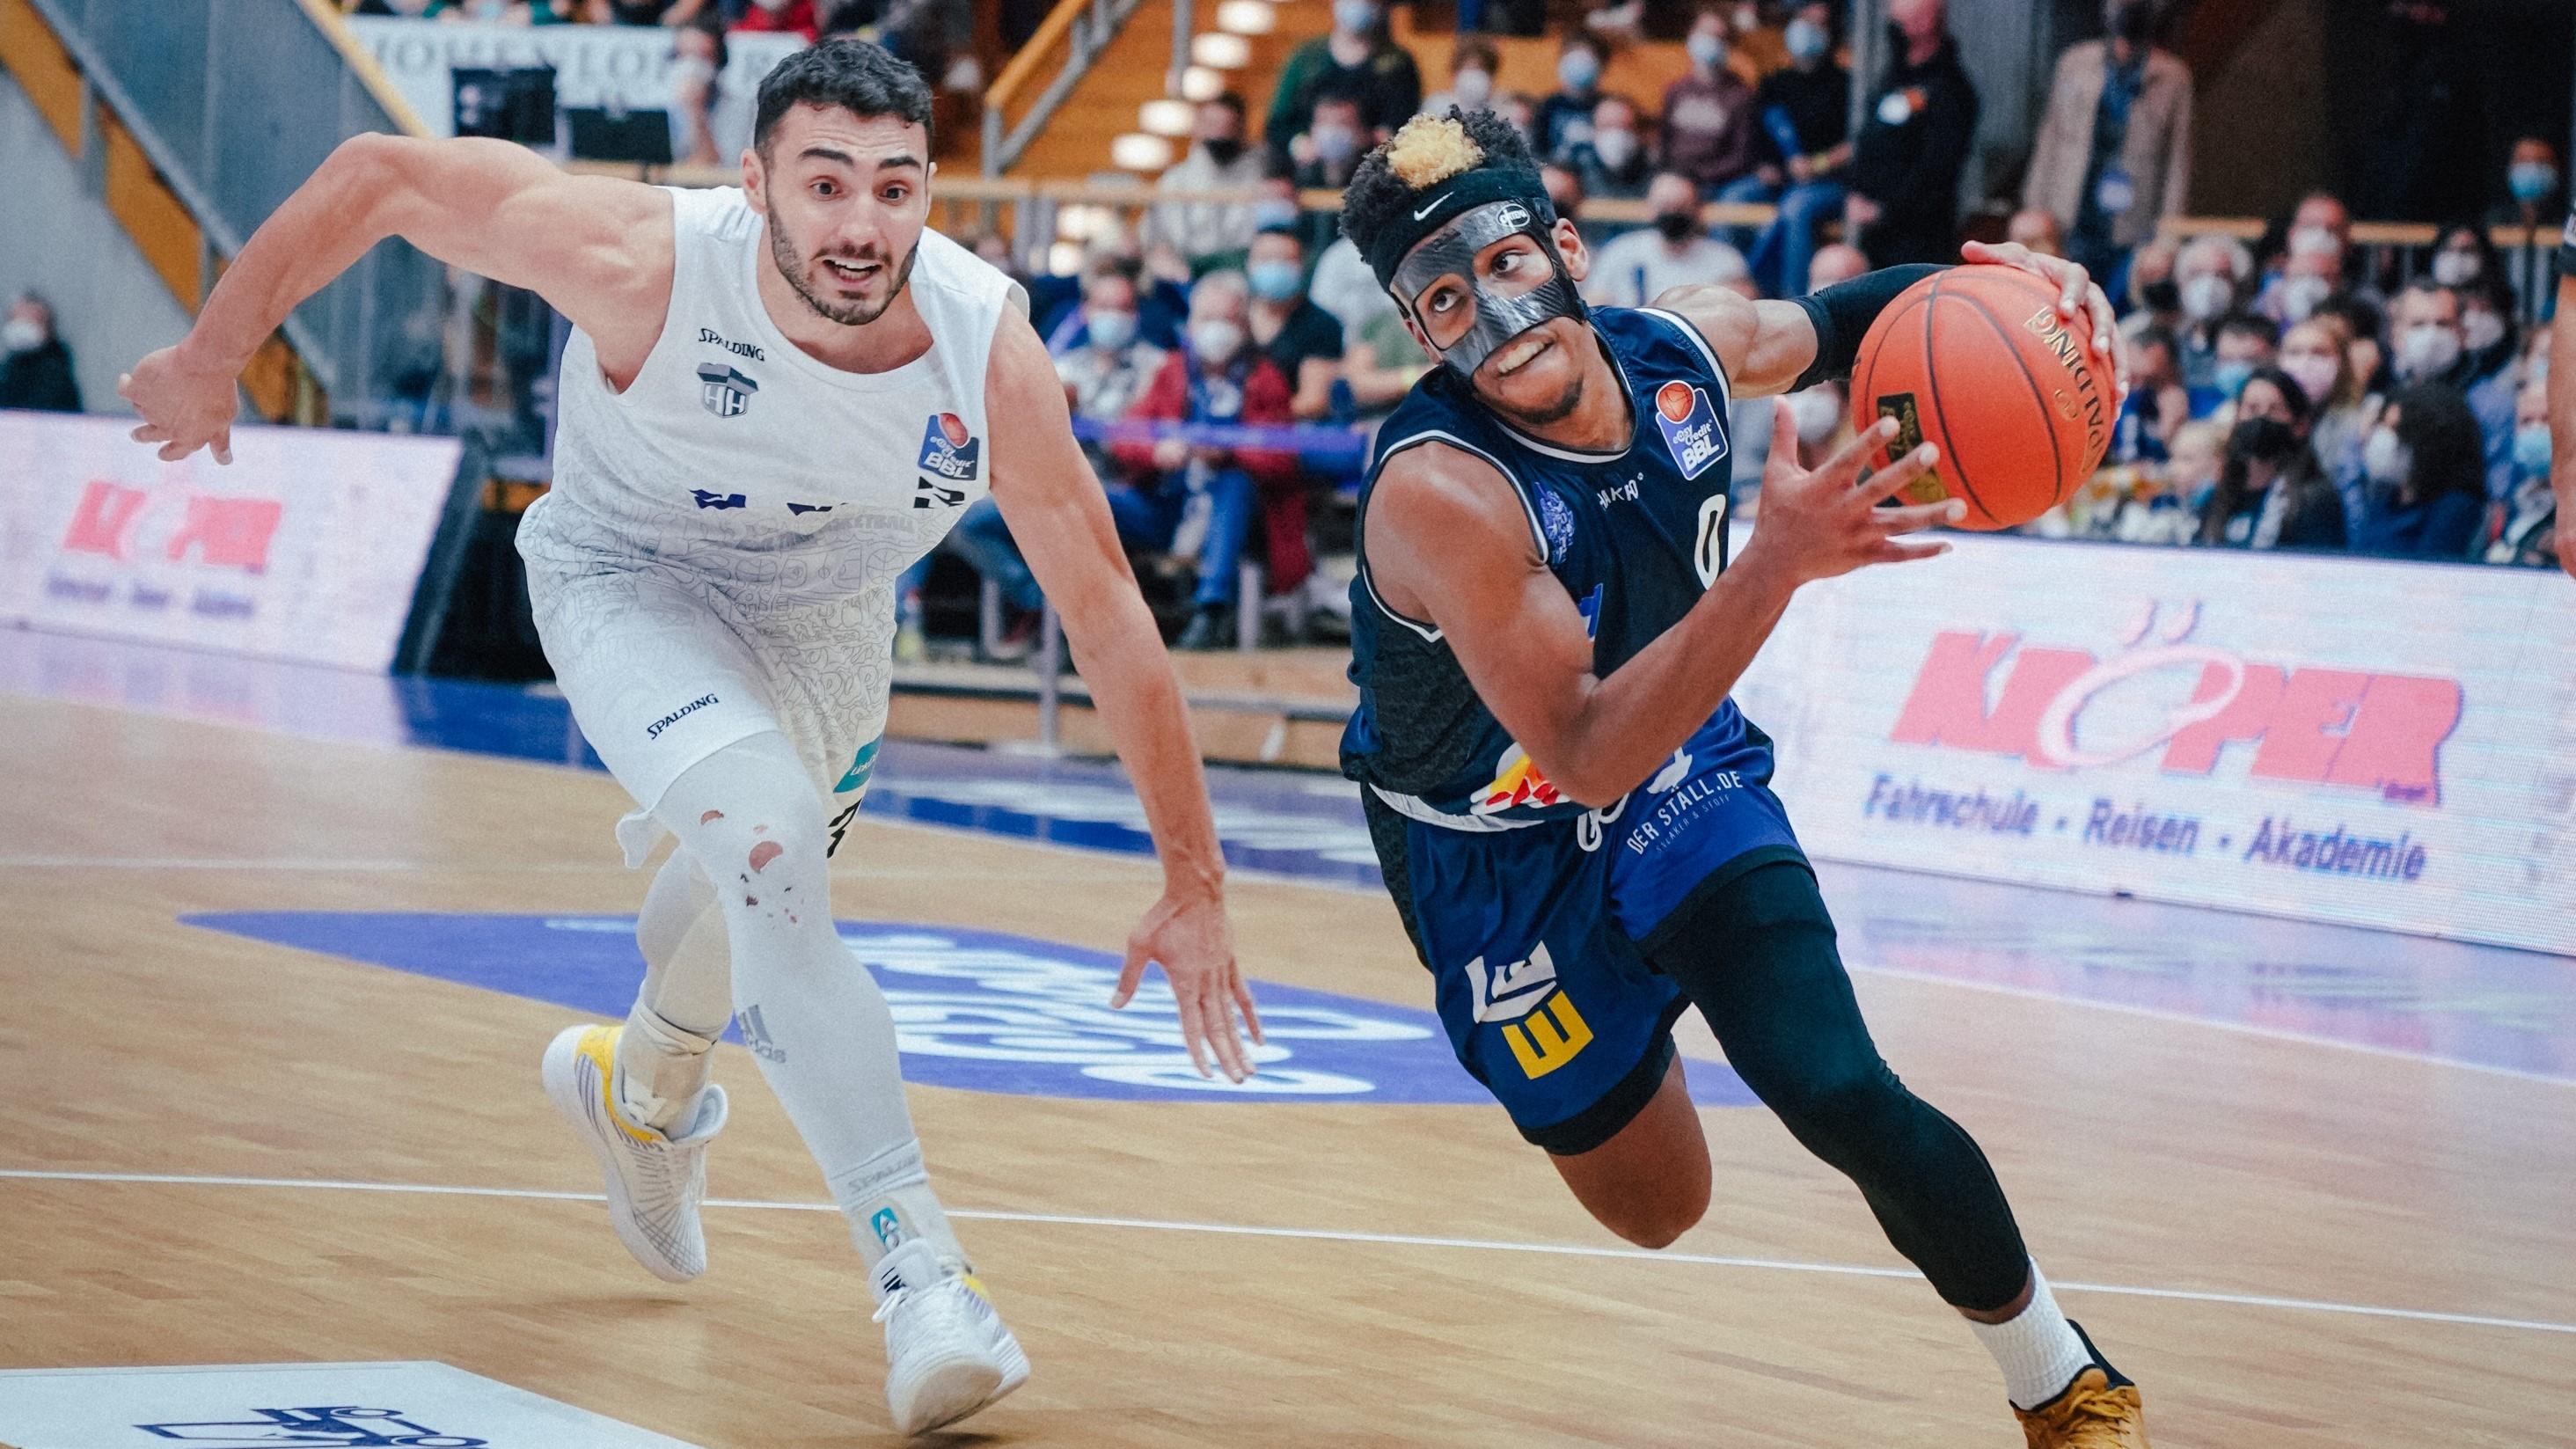 ALBA BERLIN leads off the week as they picked up a big overtime victory on the road over ratiopharm ulm, who have still not won at home. T.J. Shorts for his part punished his ex-team in HAKRO Merlins Crailsheim’s win over Hamburg Towers. And Telekom Baskets Bonn bashed Brose Bamberg by 20 points.